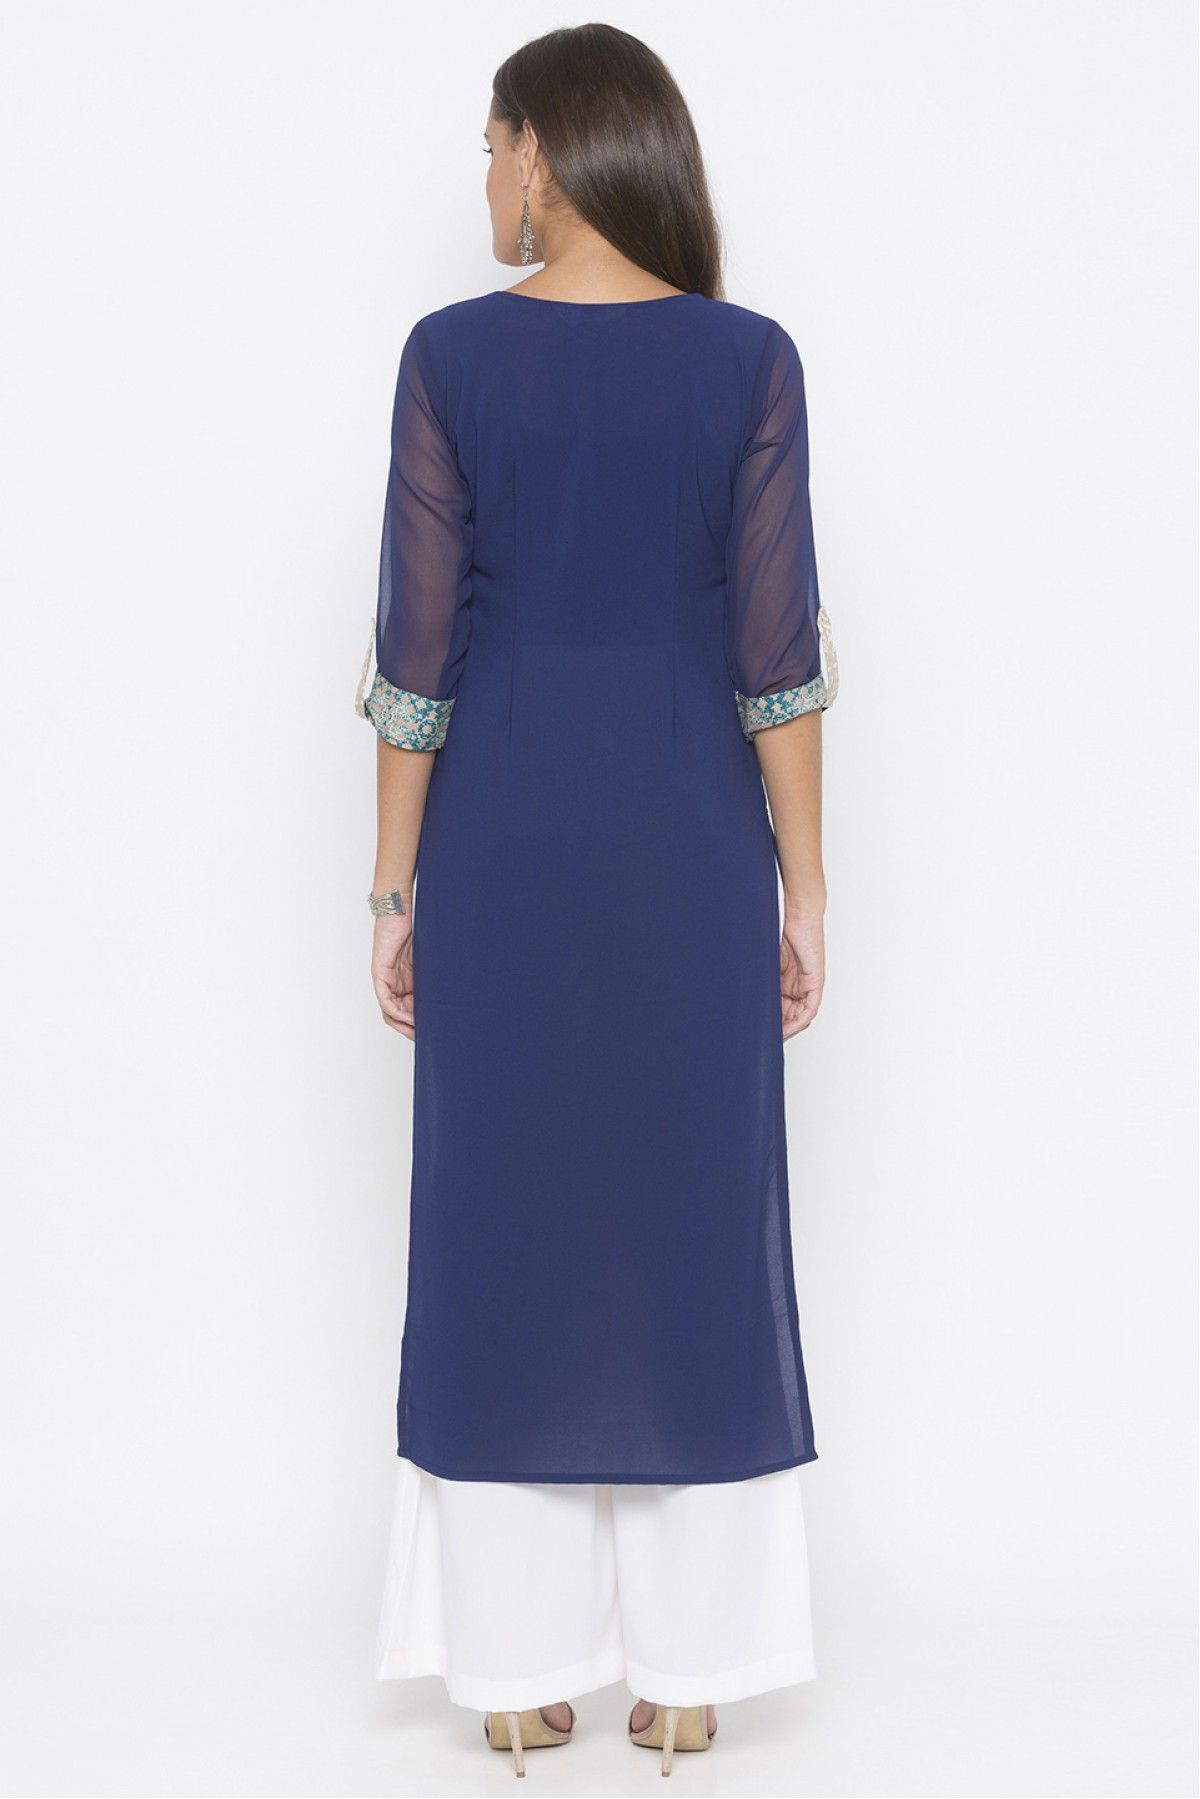 Plus Size American Crepe Embroidery Kurti In Navy Blue Colour